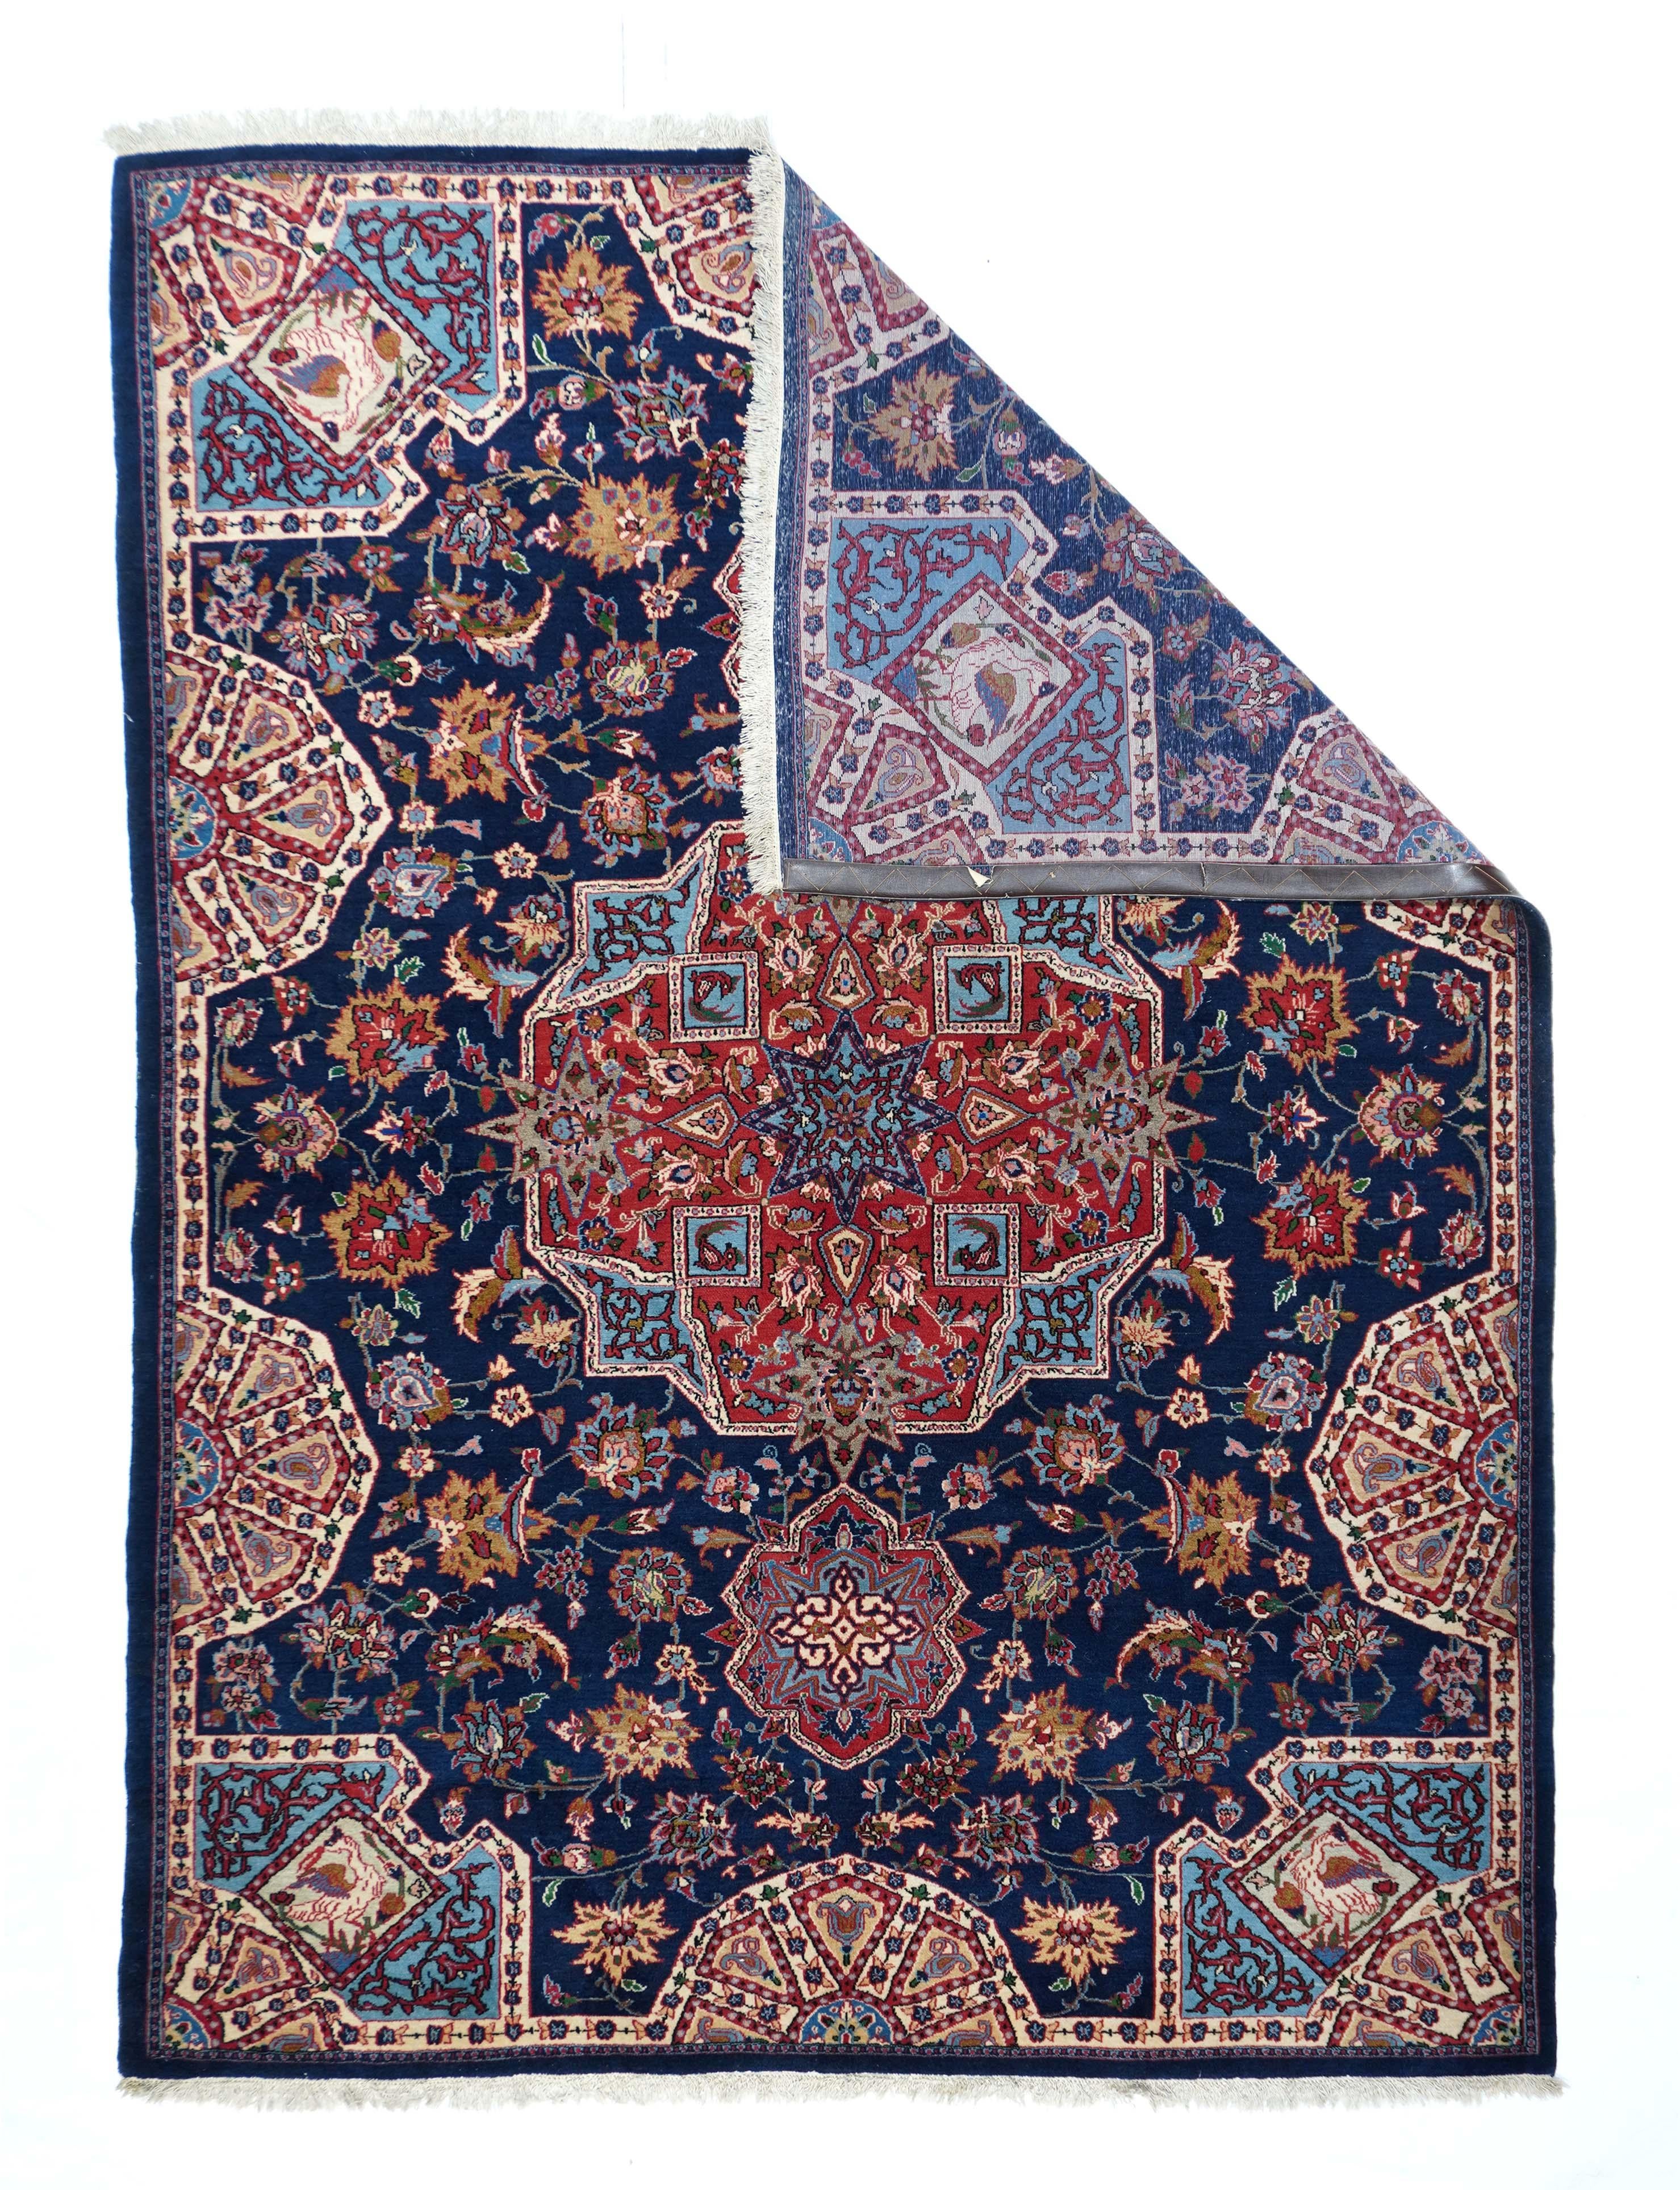 Whereas the vast majority of finely woven, central Persian Isfahan city rugs are in lighter palettes with distinct field, medallion and borders, this scatter shows a jewel-tone palette with a navy field, red cruciform over octogramme medallion,